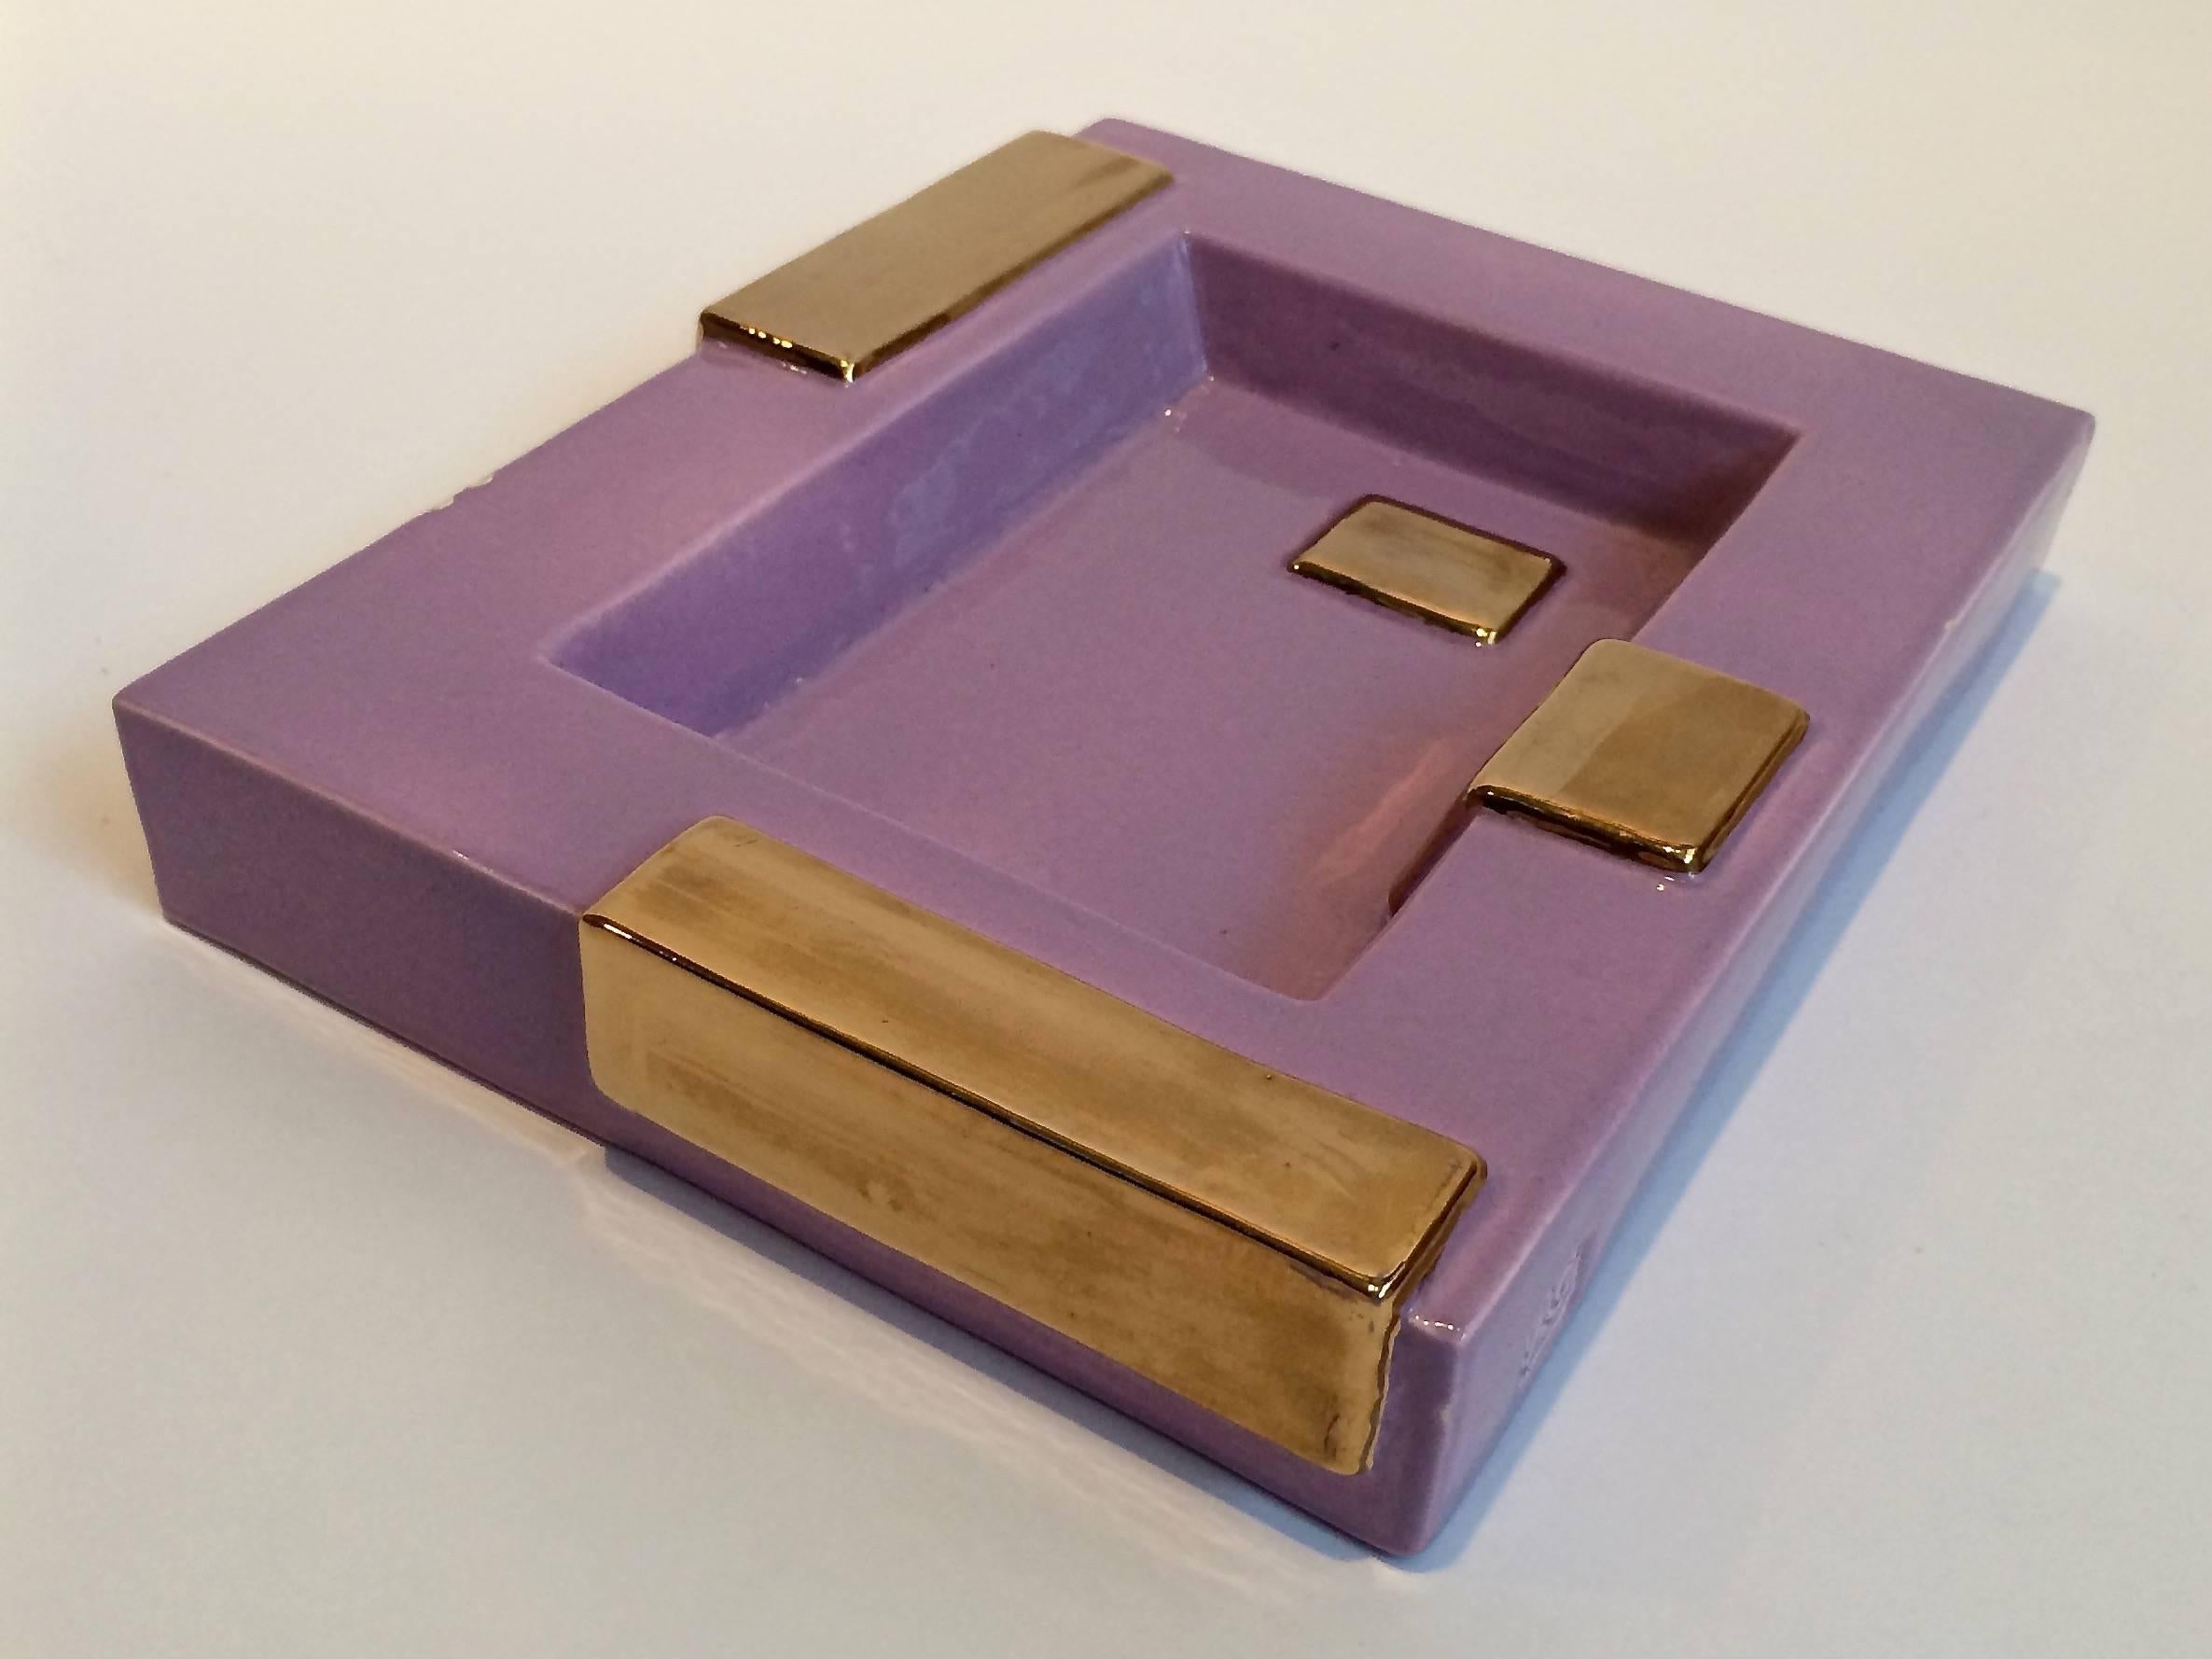 A lavender and gold ceramic tray by artists Elizabeth Garouste and Mattia Bonetti. The tray is part of the Boogie-Woogie collection which includes other ceramic table accessories. This piece is marked 